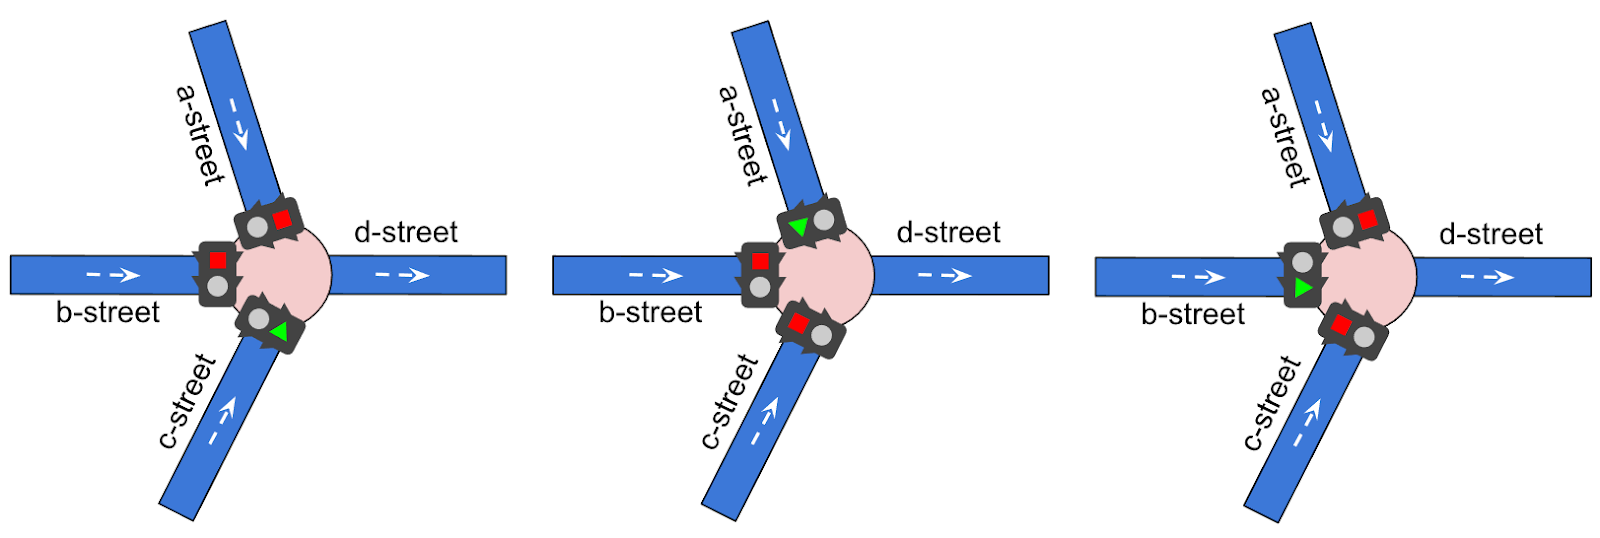 Example of intersection with traffic light schedule that covers all streets (see description below)